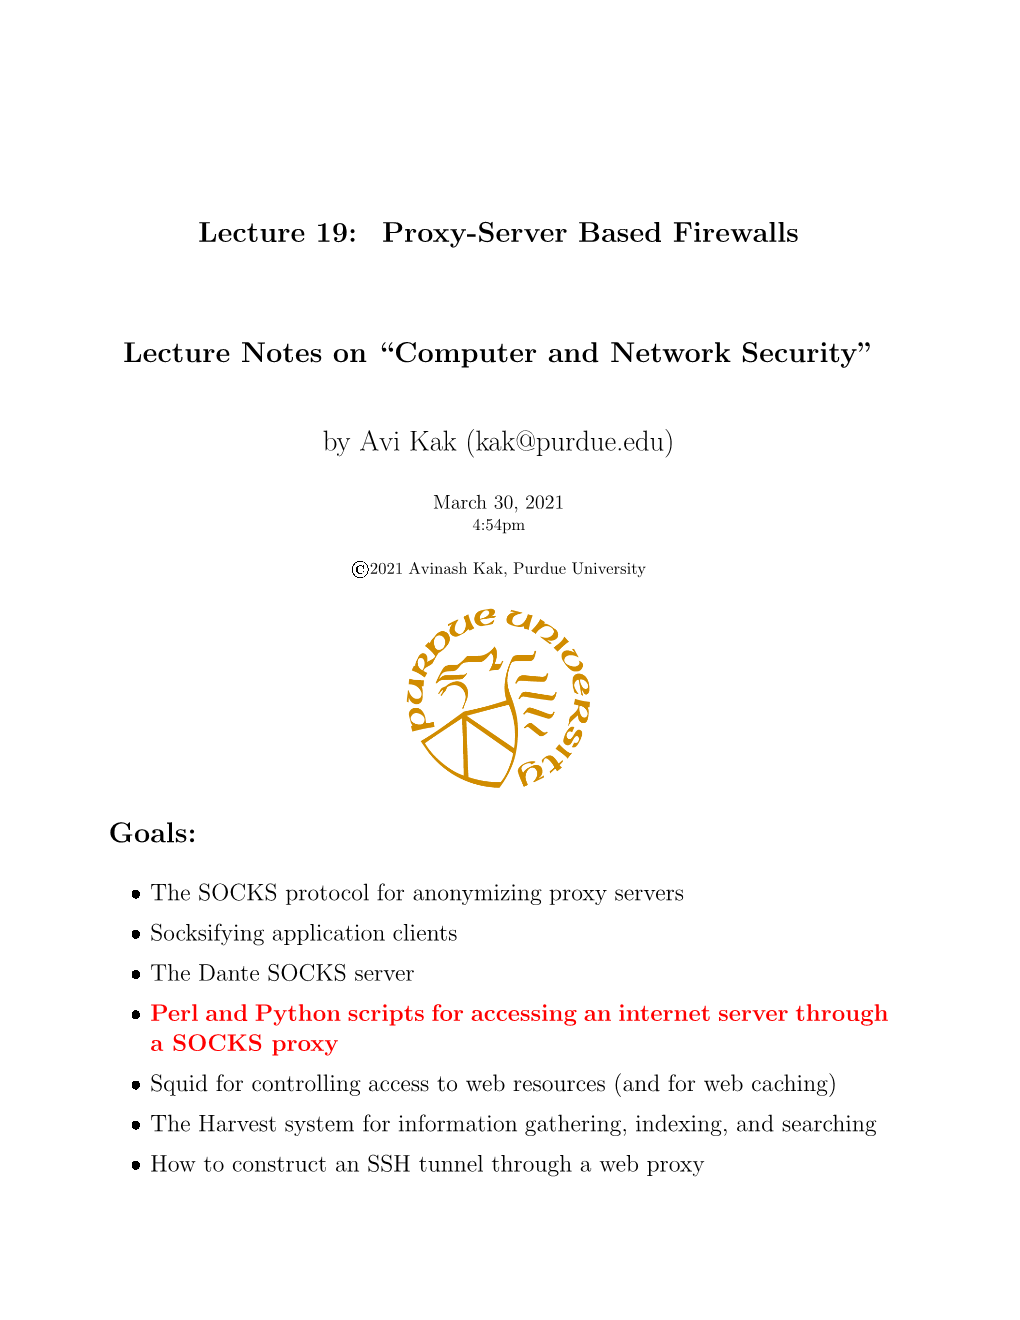 Lecture 19: Proxy-Server Based Firewalls Lecture Notes On